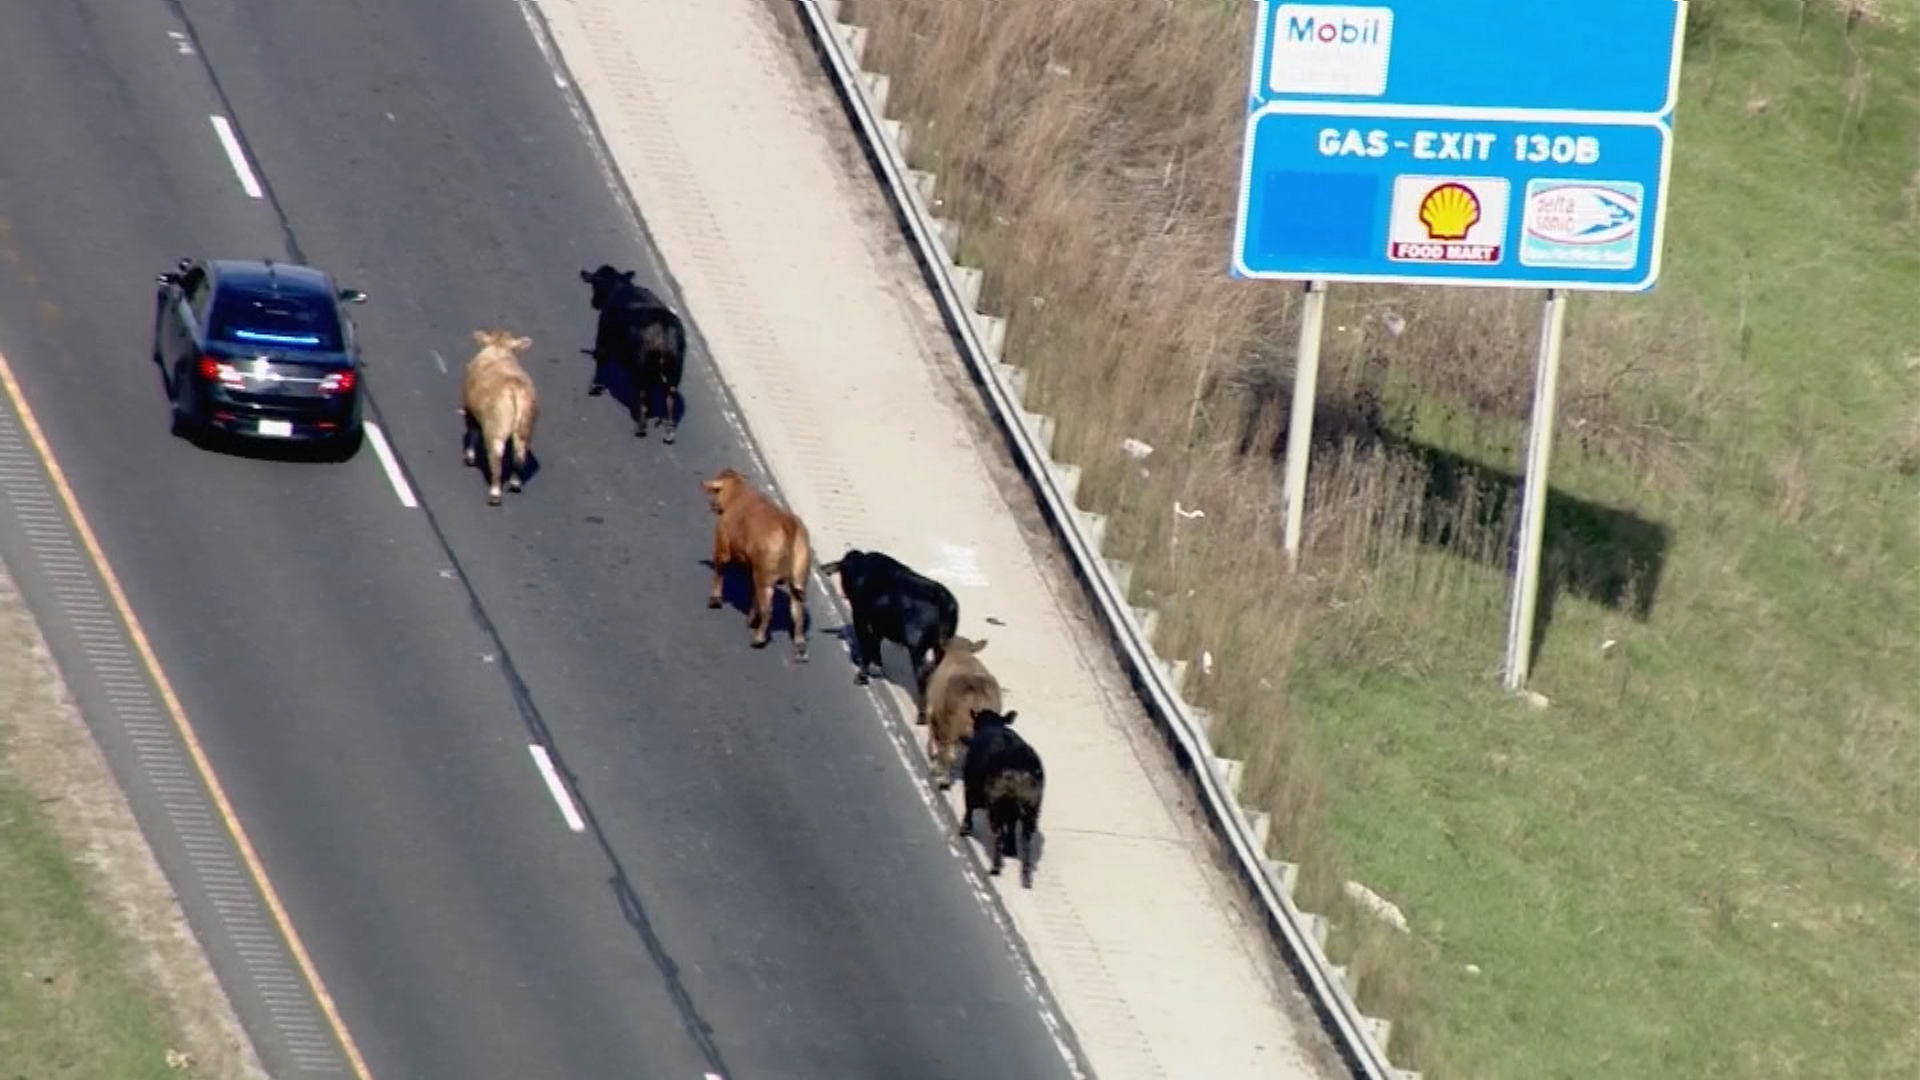 Joliet Farmers Wrangle Cows Thrown From Semitrailer After Crash Shut Down Interstate 80